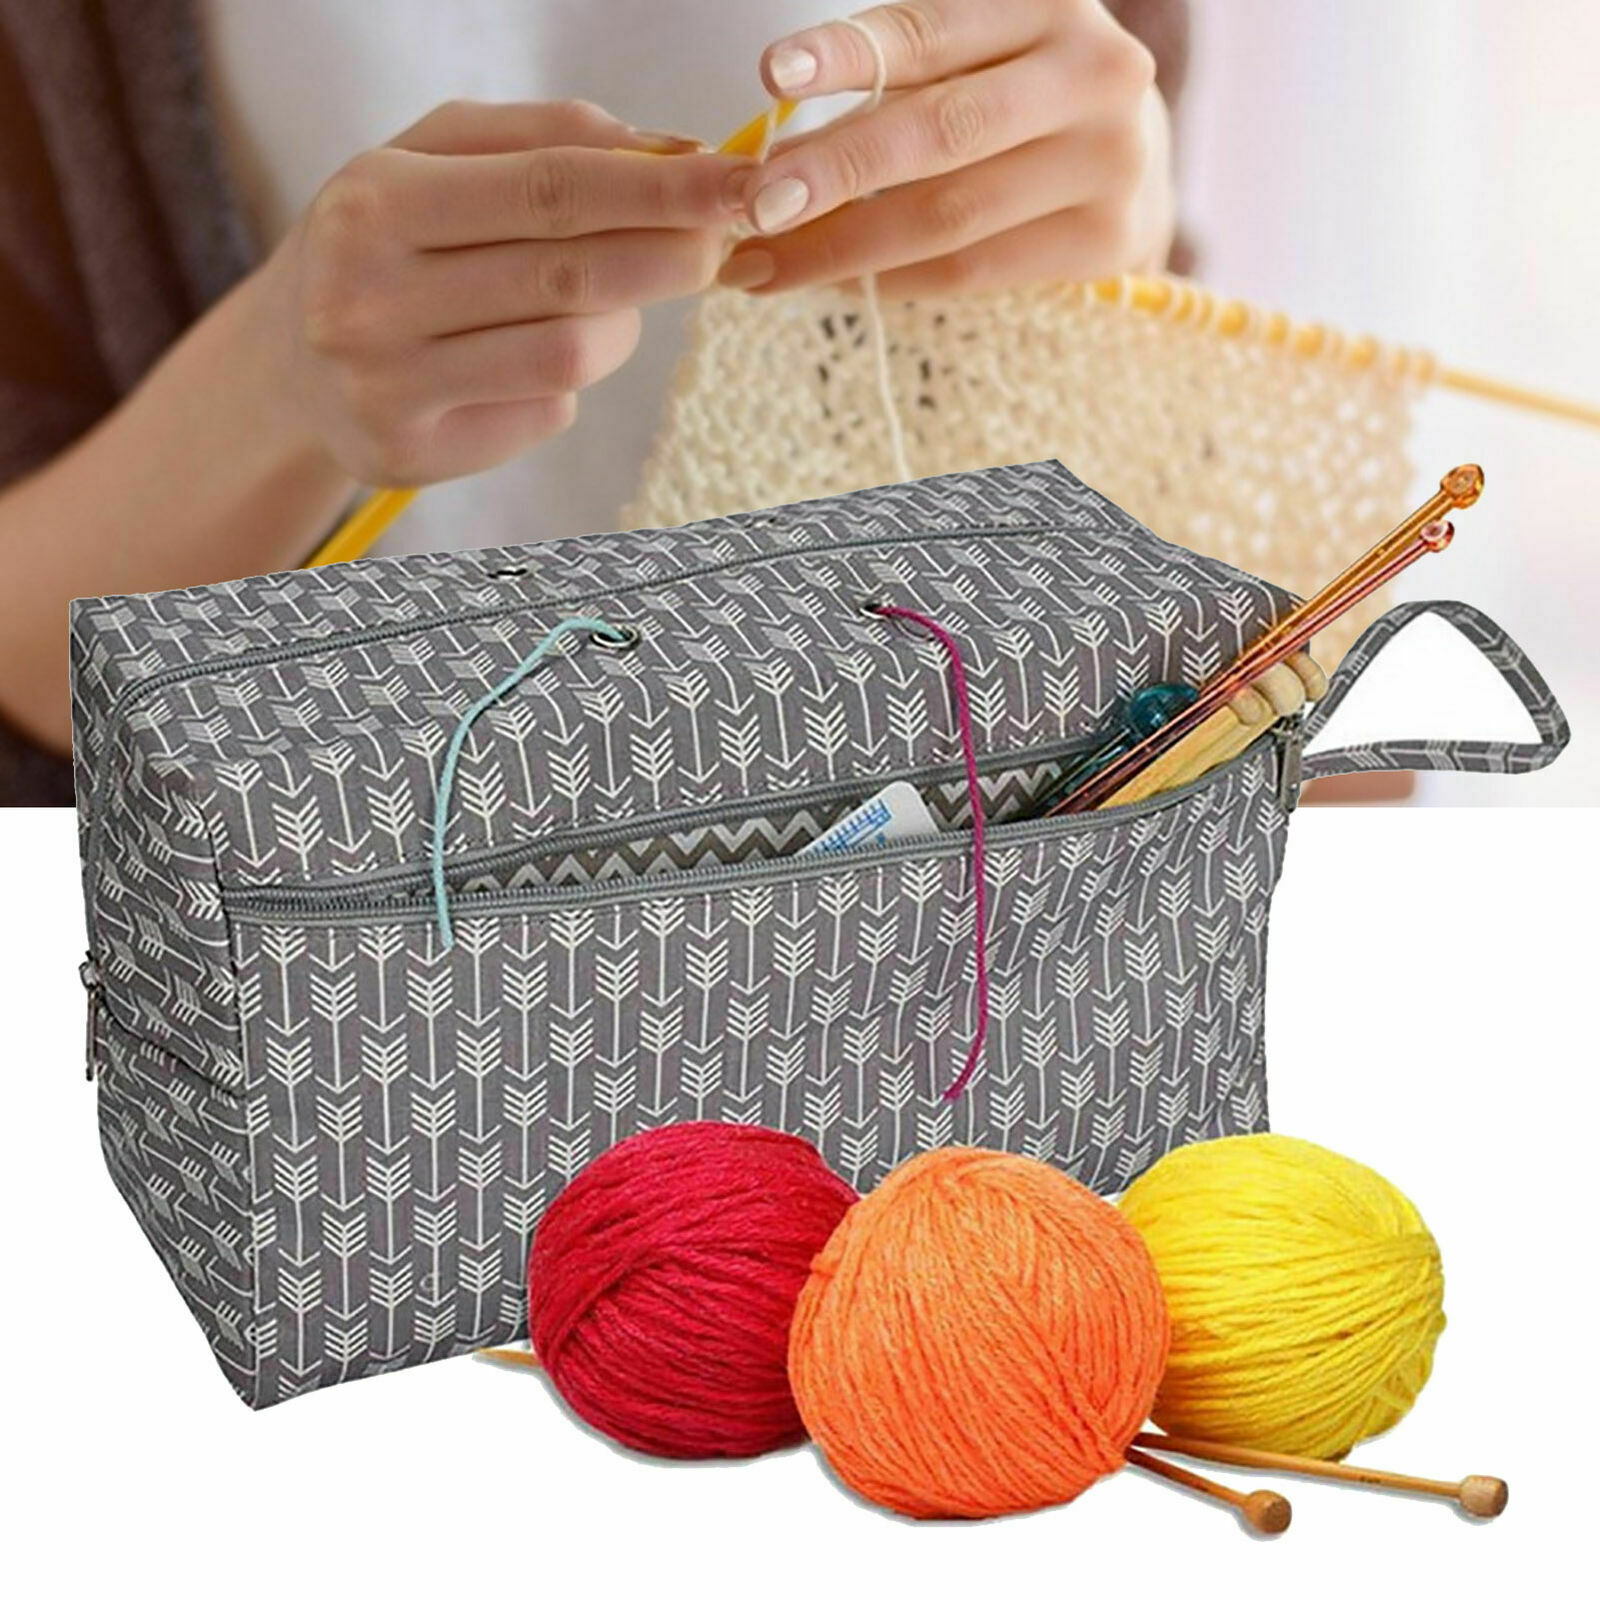 Portable Knitting Bag Multi-color Craft Tote Wool Crochet Needles ...